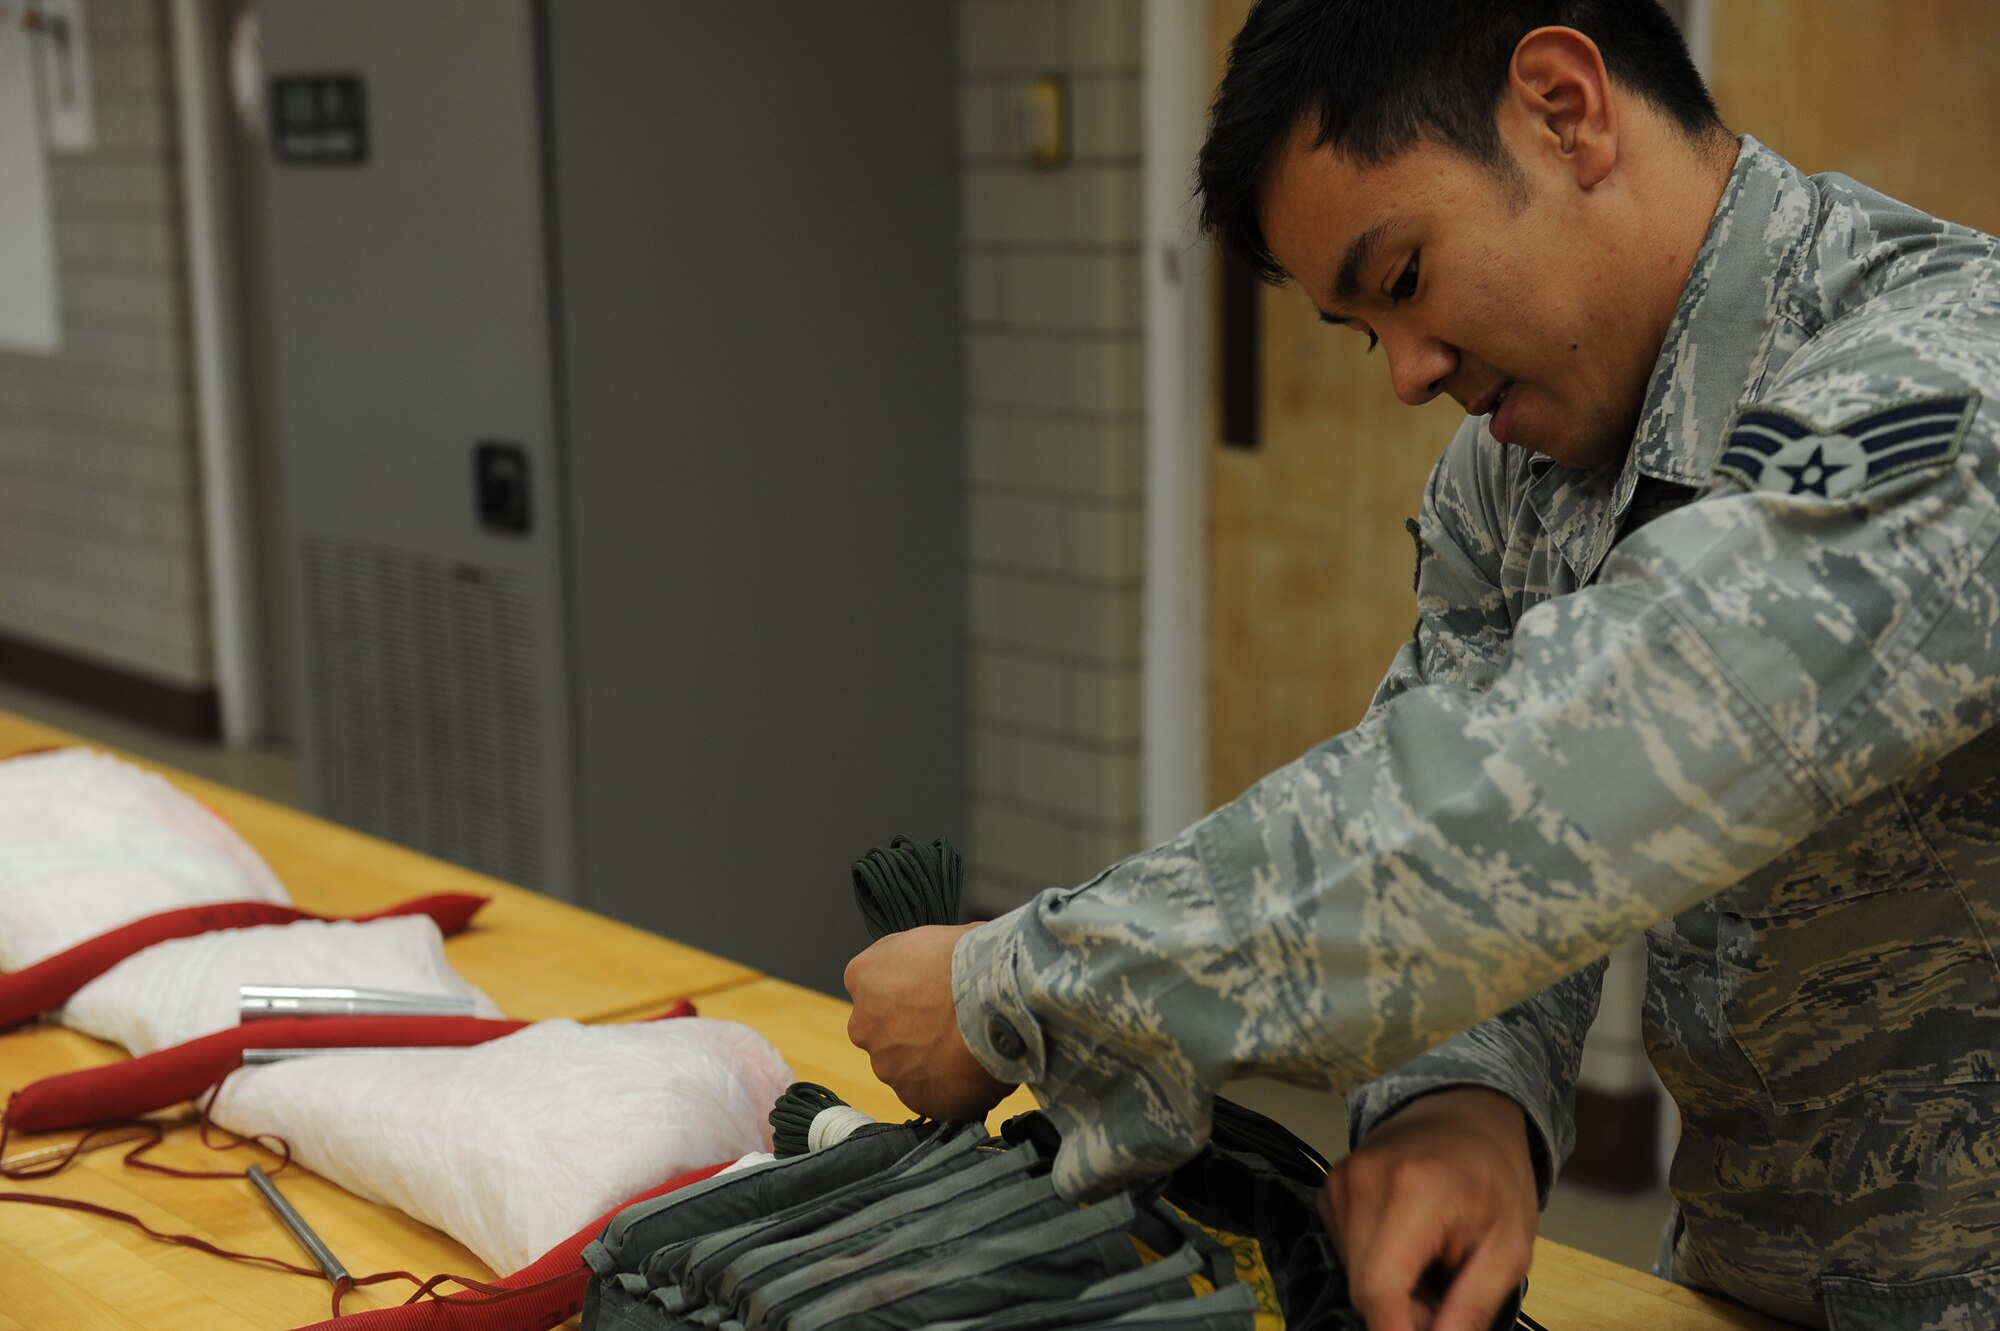 Senior Airman Ian Carrion, an air crew flight equipment journeyman with the 5th Operations Support Squadron here, carefully threads the lines of a parachute through an individual sized backpack. This parachute is assigned to a crew member of a B-52 Stratofortress and is used in case of emergency, requiring maximum attention to detail by the Airman. (U.S Air Force photo/Airman 1st Class Lauren Pitts)